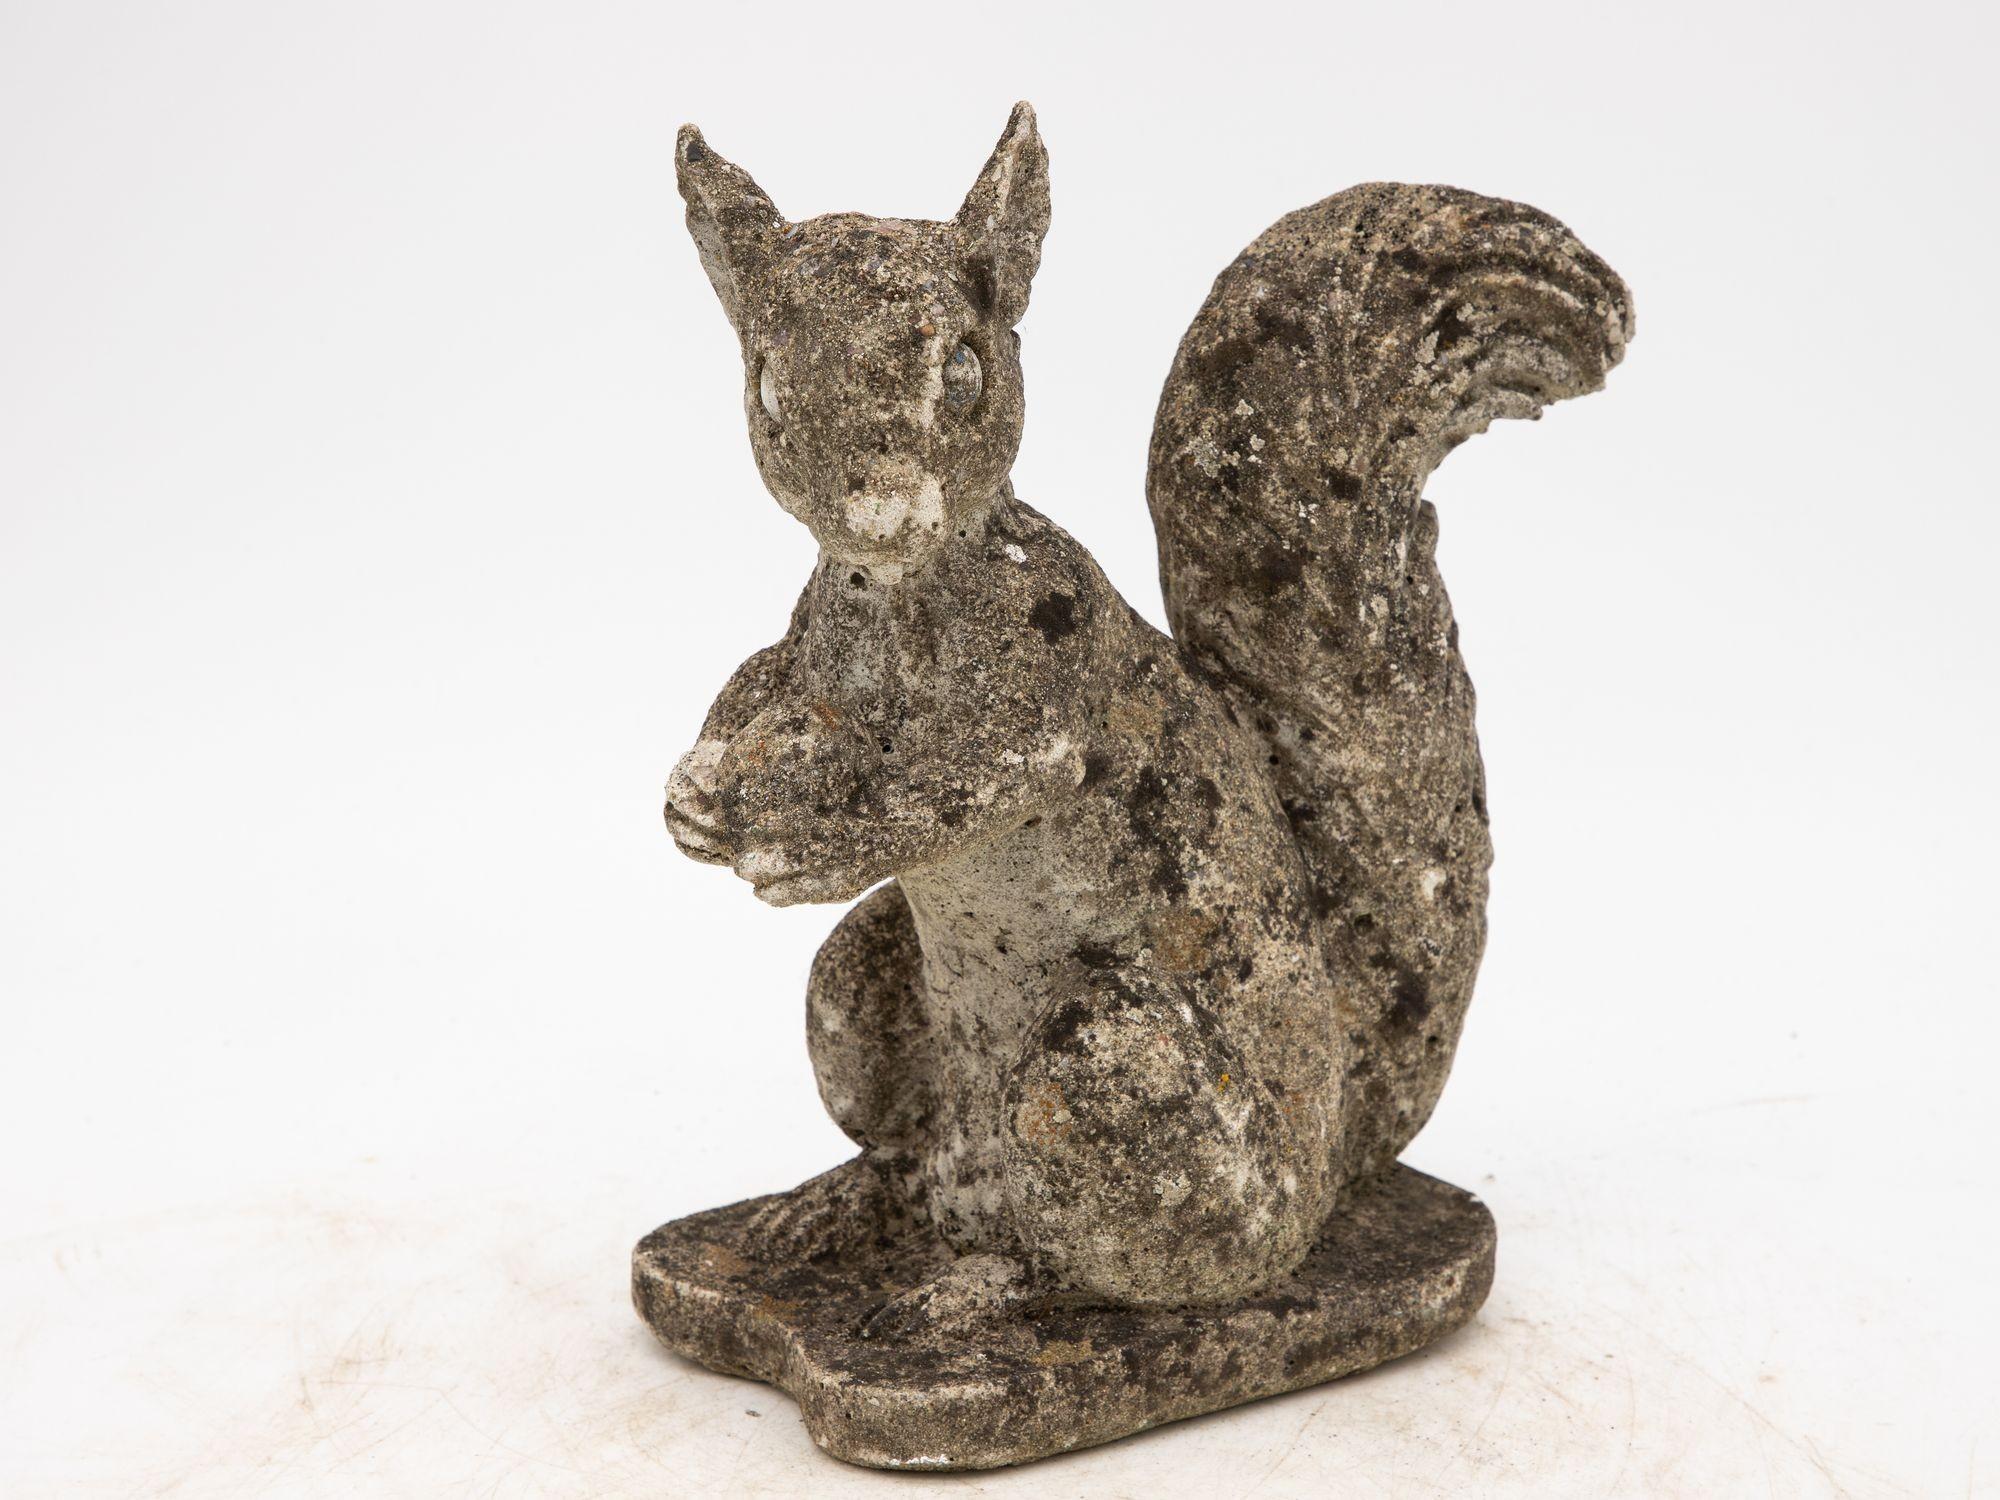 This delightful mod 20th Century concrete squirrel garden ornament is the epitome of outdoor charm. This enchanting piece, meticulously crafted from sturdy concrete, captures the essence of a playful squirrel in lifelike detail. From its curious